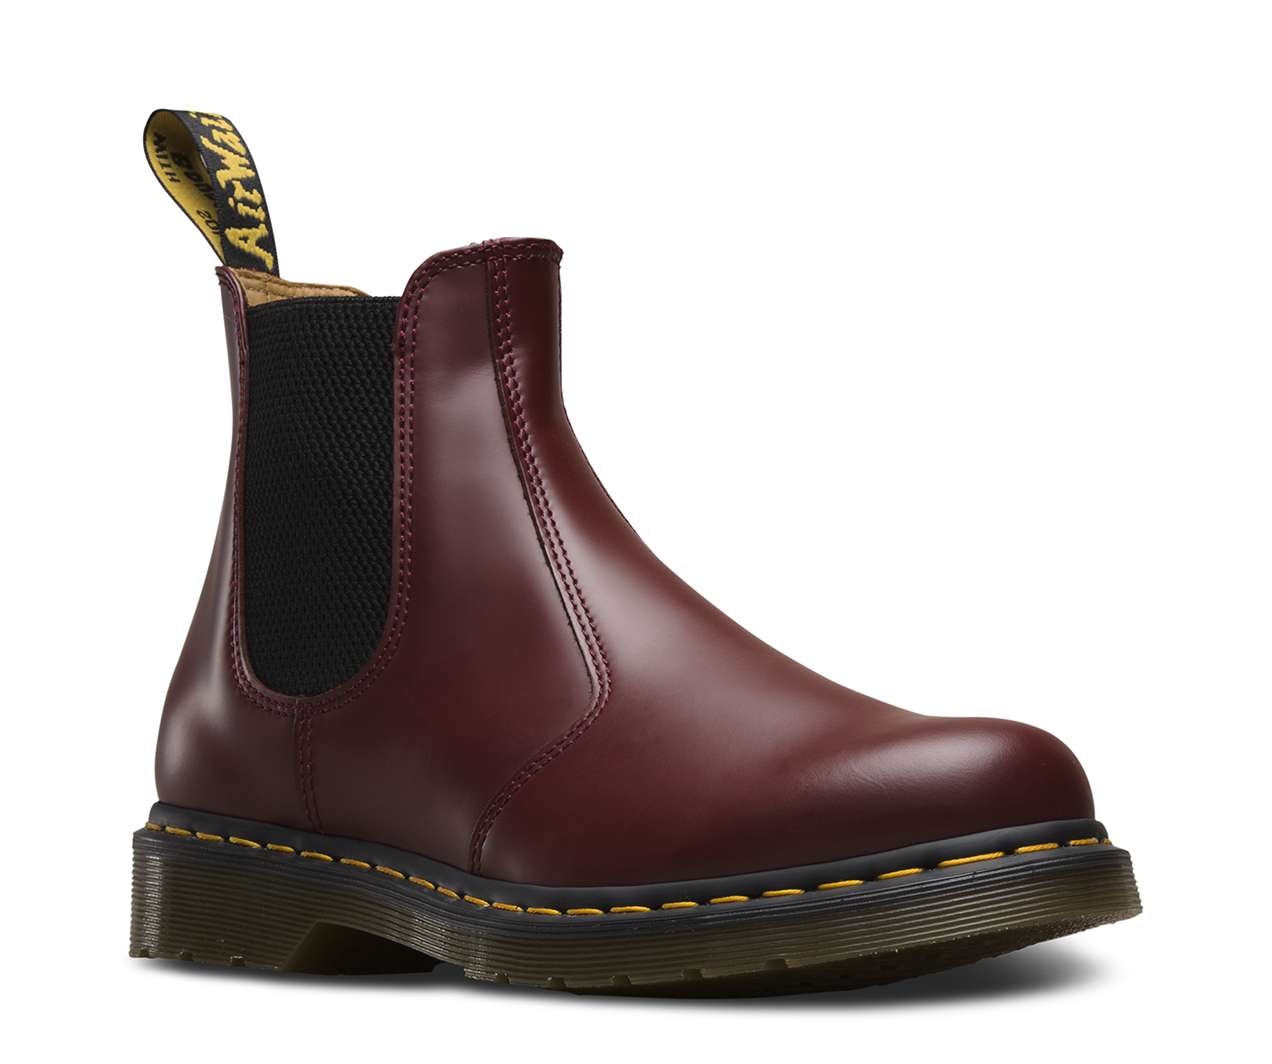 chelsea boot 2976 yellow stitch | 2976 chelsea boots | official dr. martens store ECZRAHP